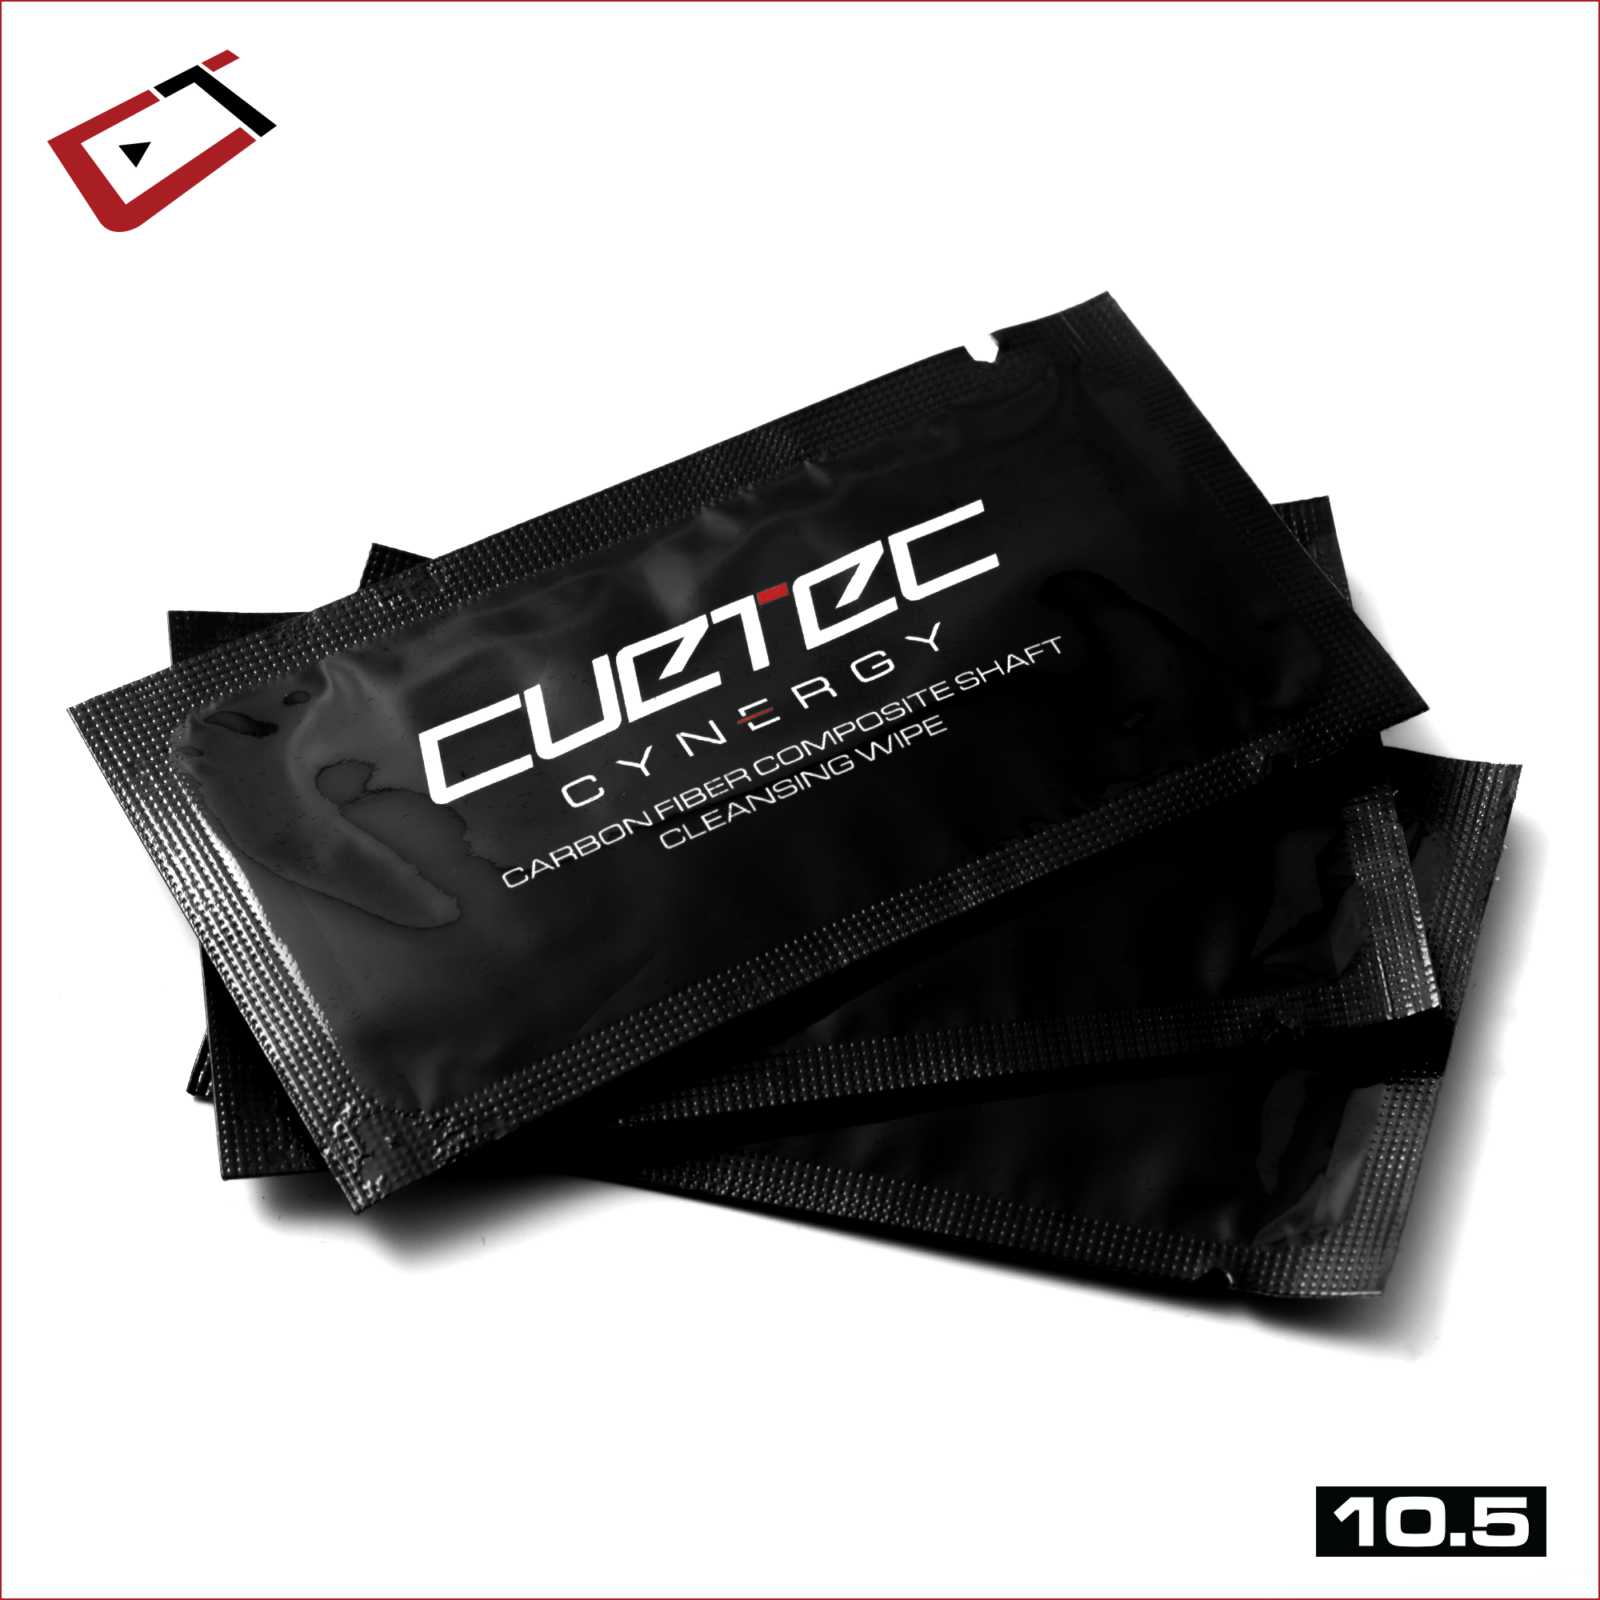 Cuetec Cynergy Shaft 10.5mm Radial 95-026T Wipes